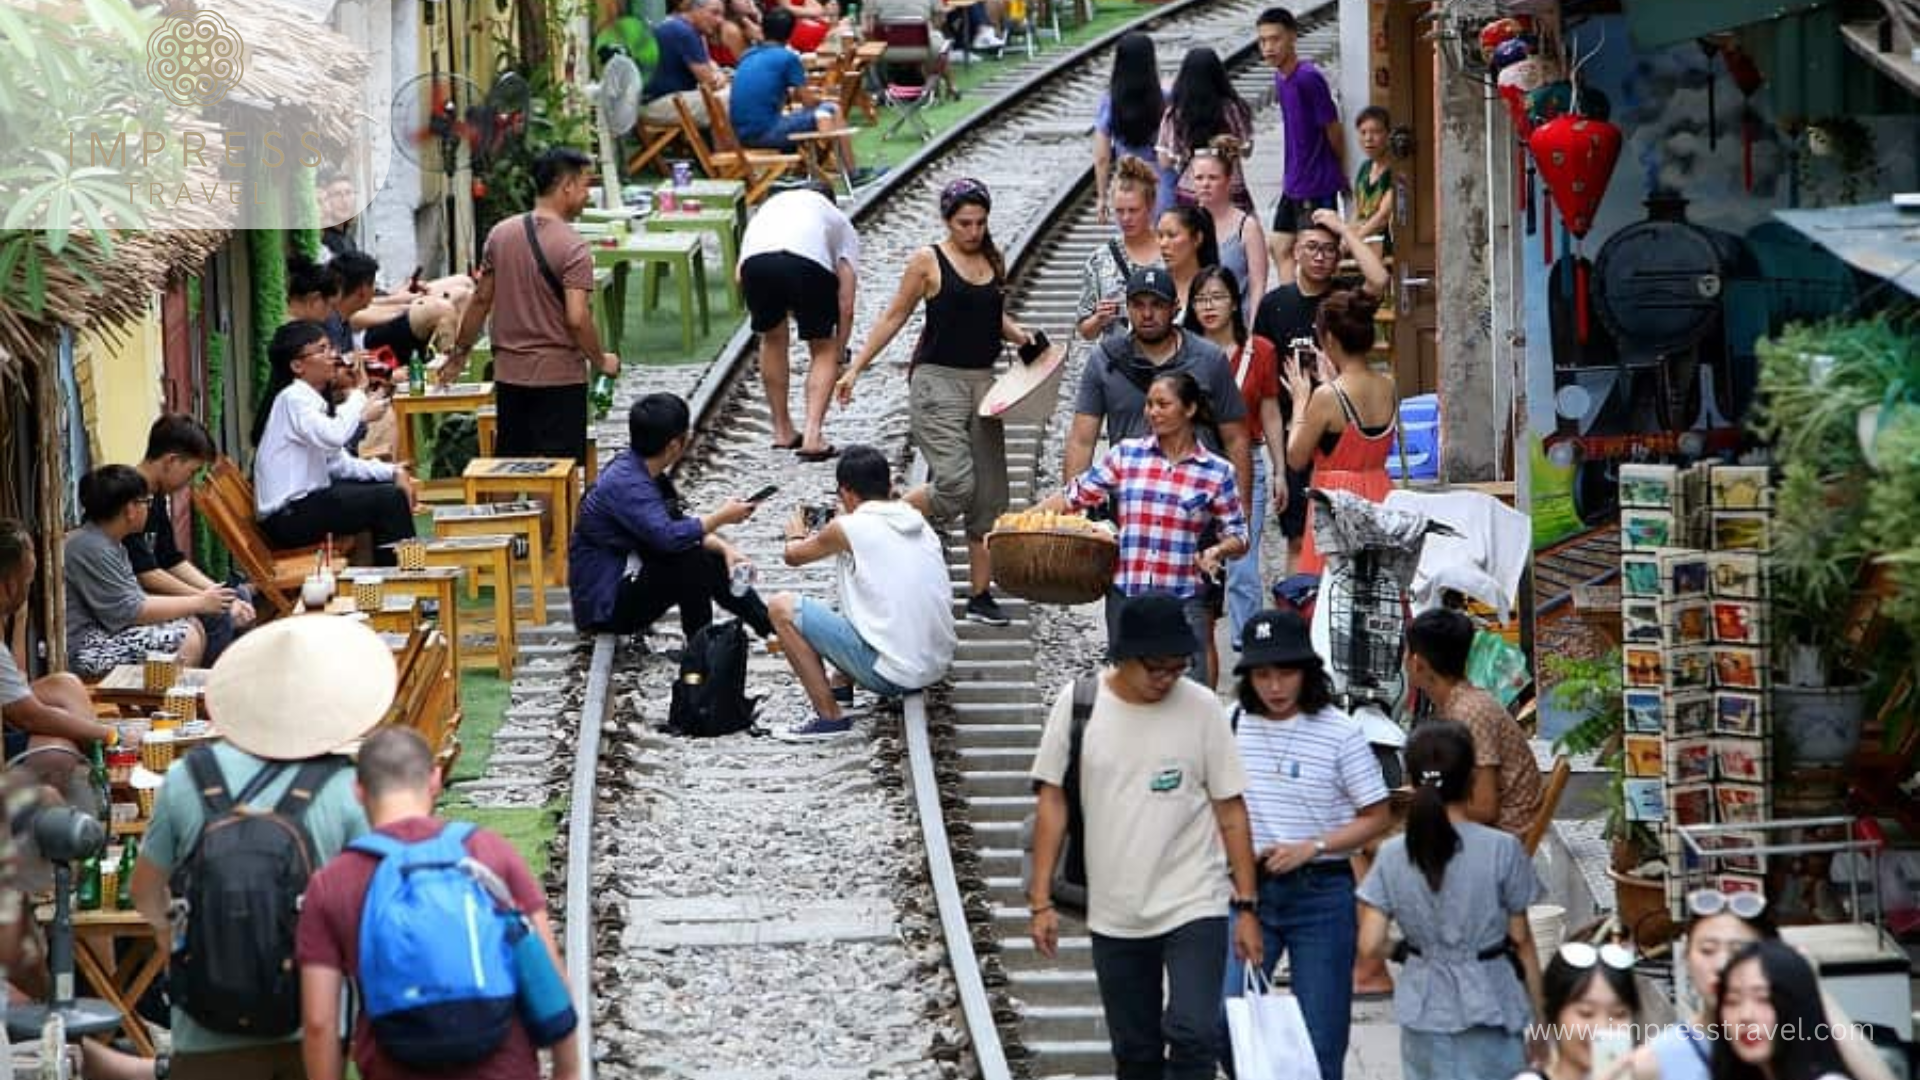 Suggest the best time to explore Hanoi Train Street